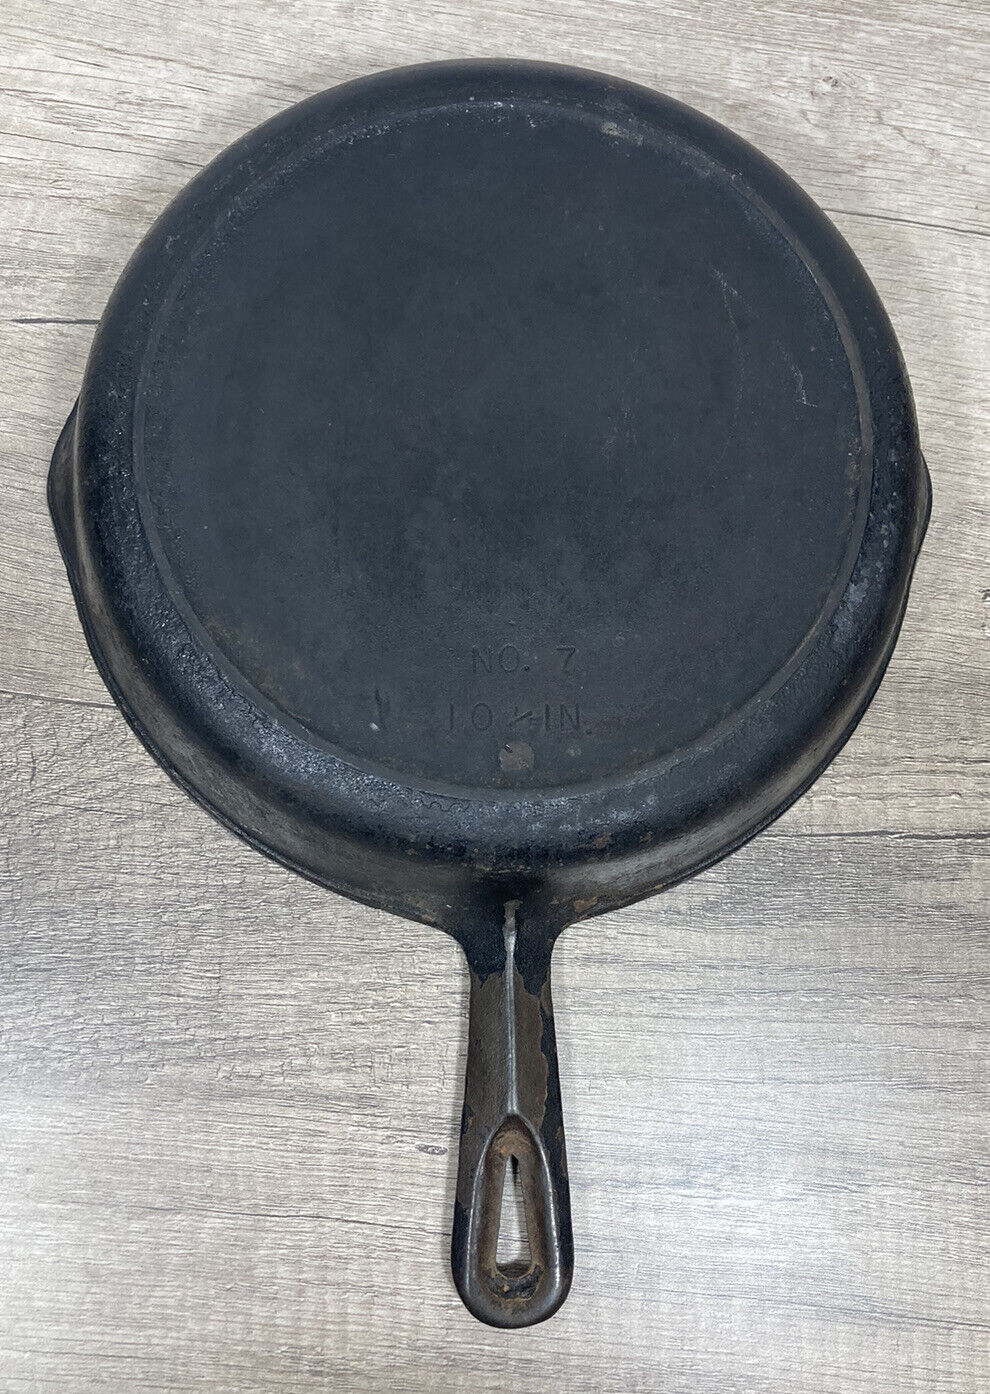 Vintage No. 7, 10-1/8 inch Cast Iron Pan, Smooth, Flat